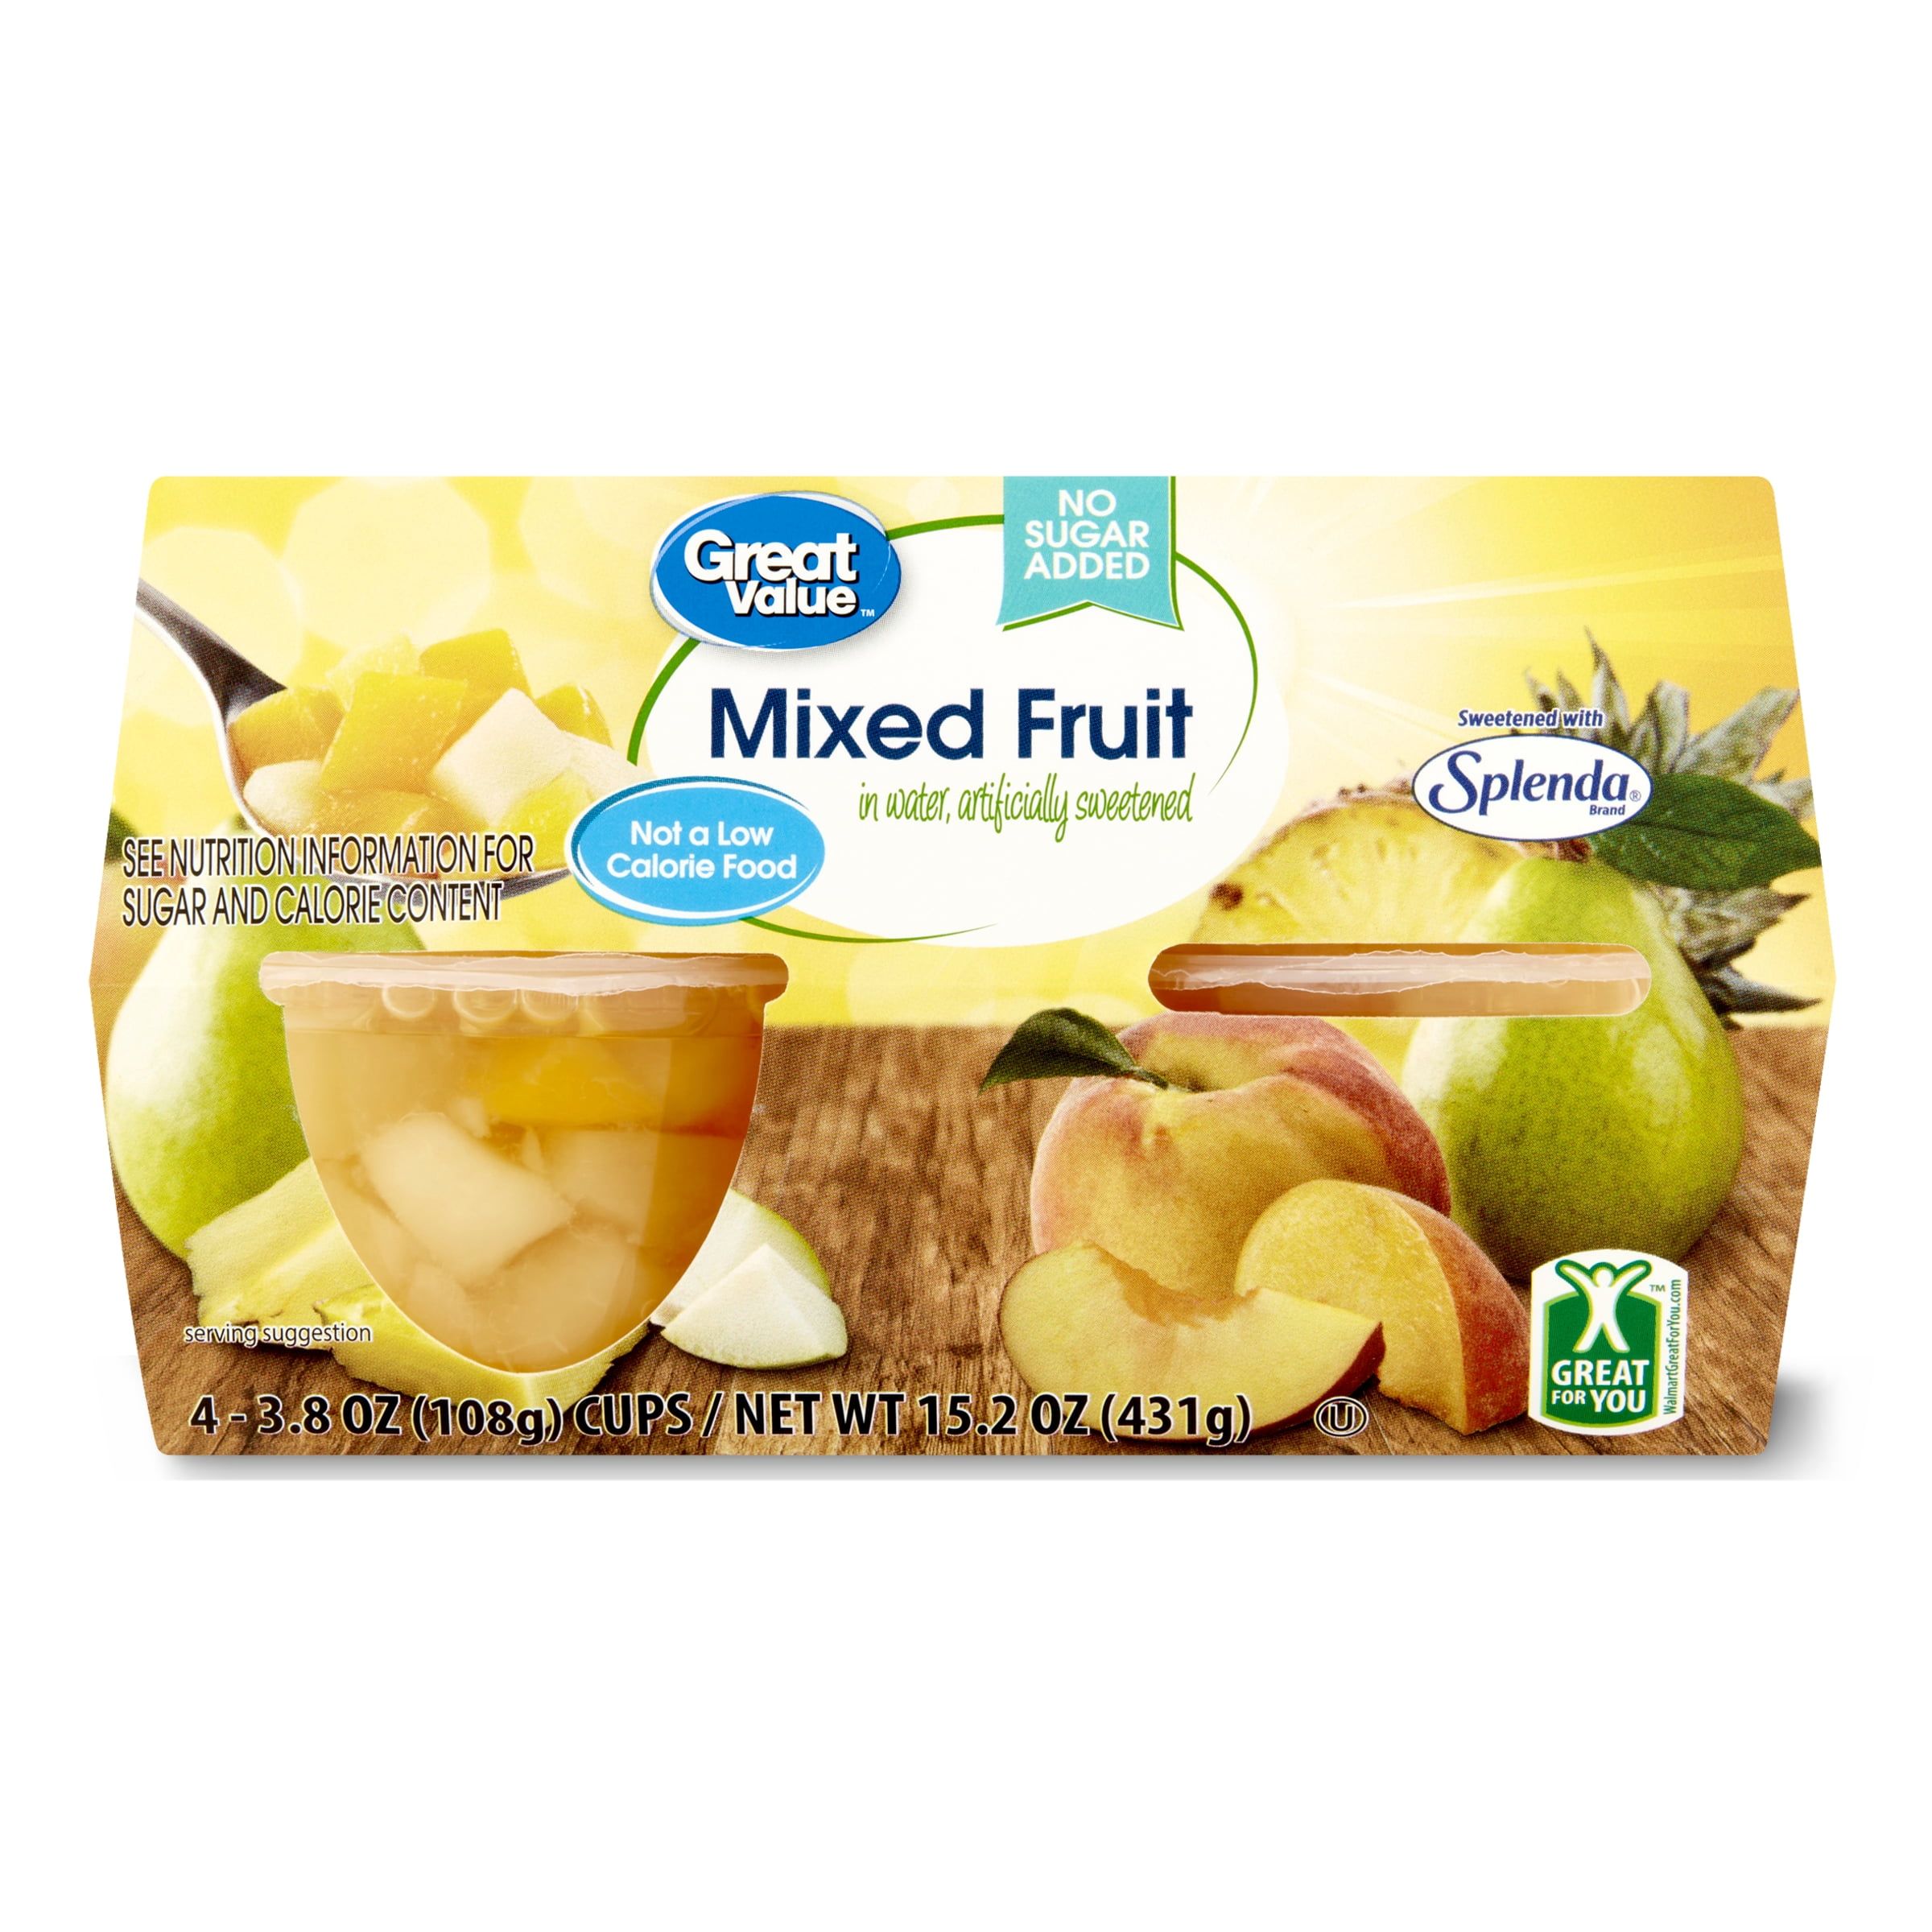 Great Value Mixed Fruit, 3.8 oz, 4 Ct